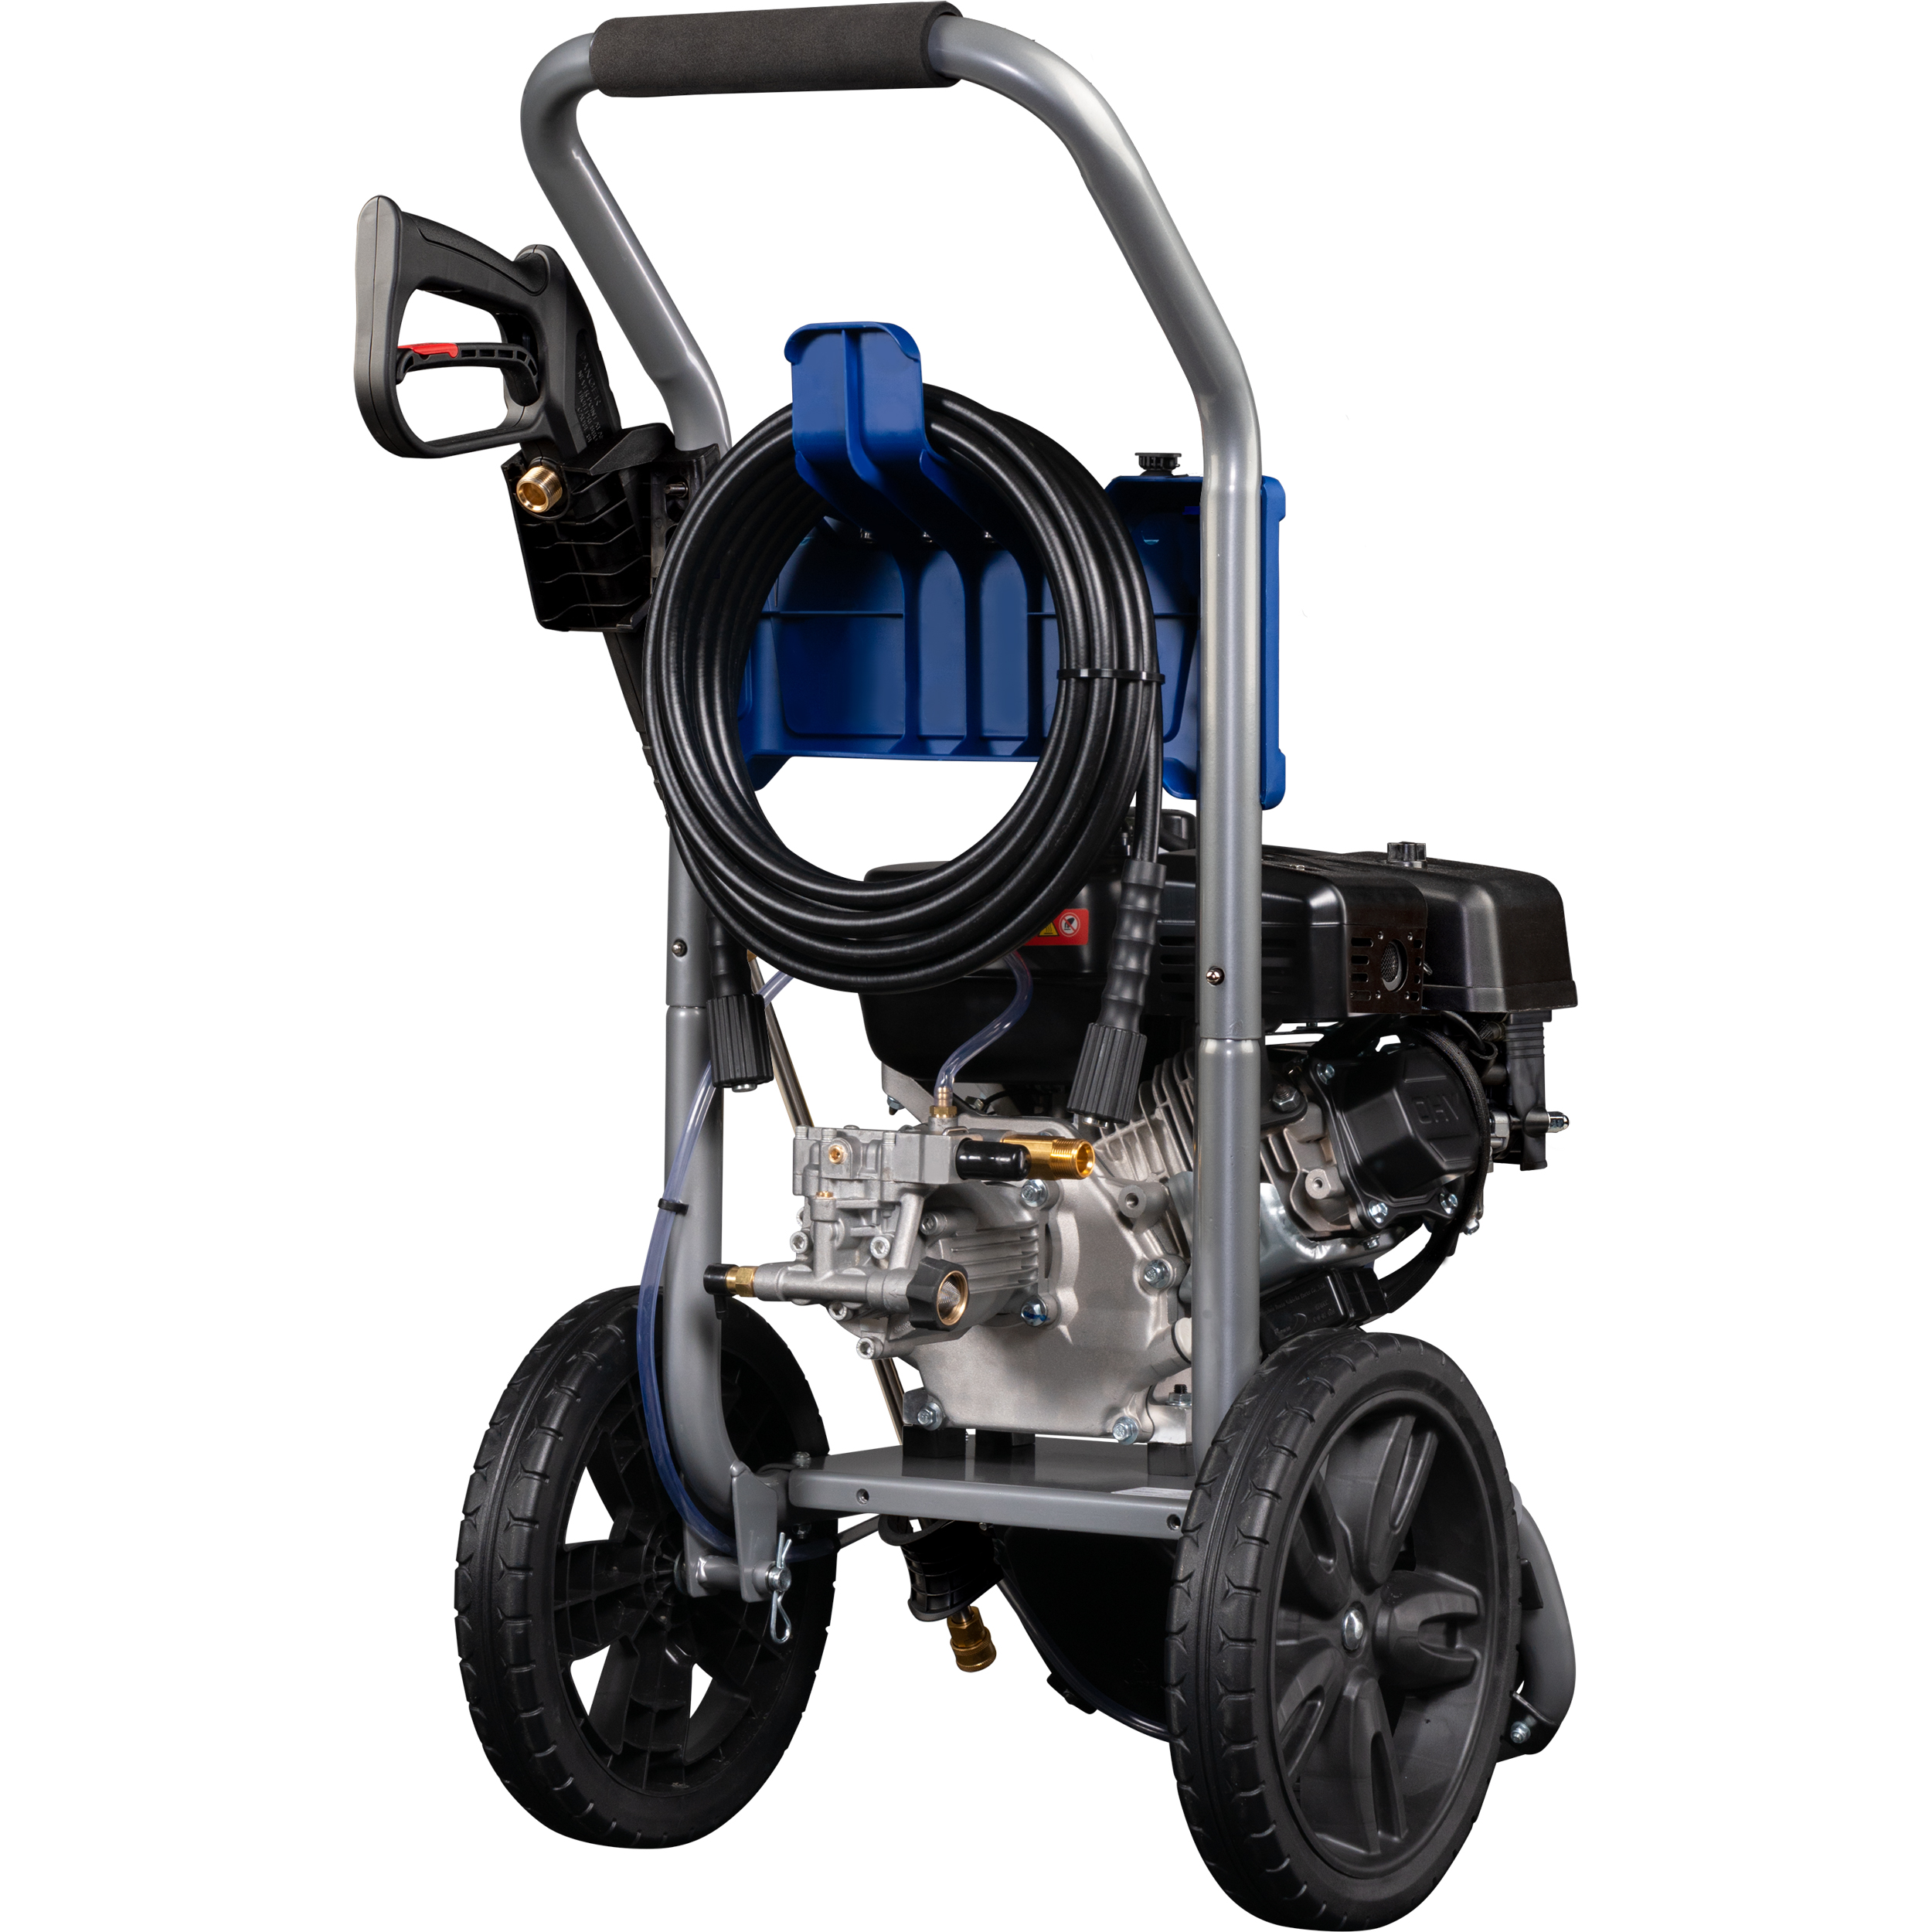 Westinghouse 3200-PSI, 2.5-GPM Gas Pressure Washer with 5 Nozzles & Soap Tank, 63 lbs. - image 12 of 13